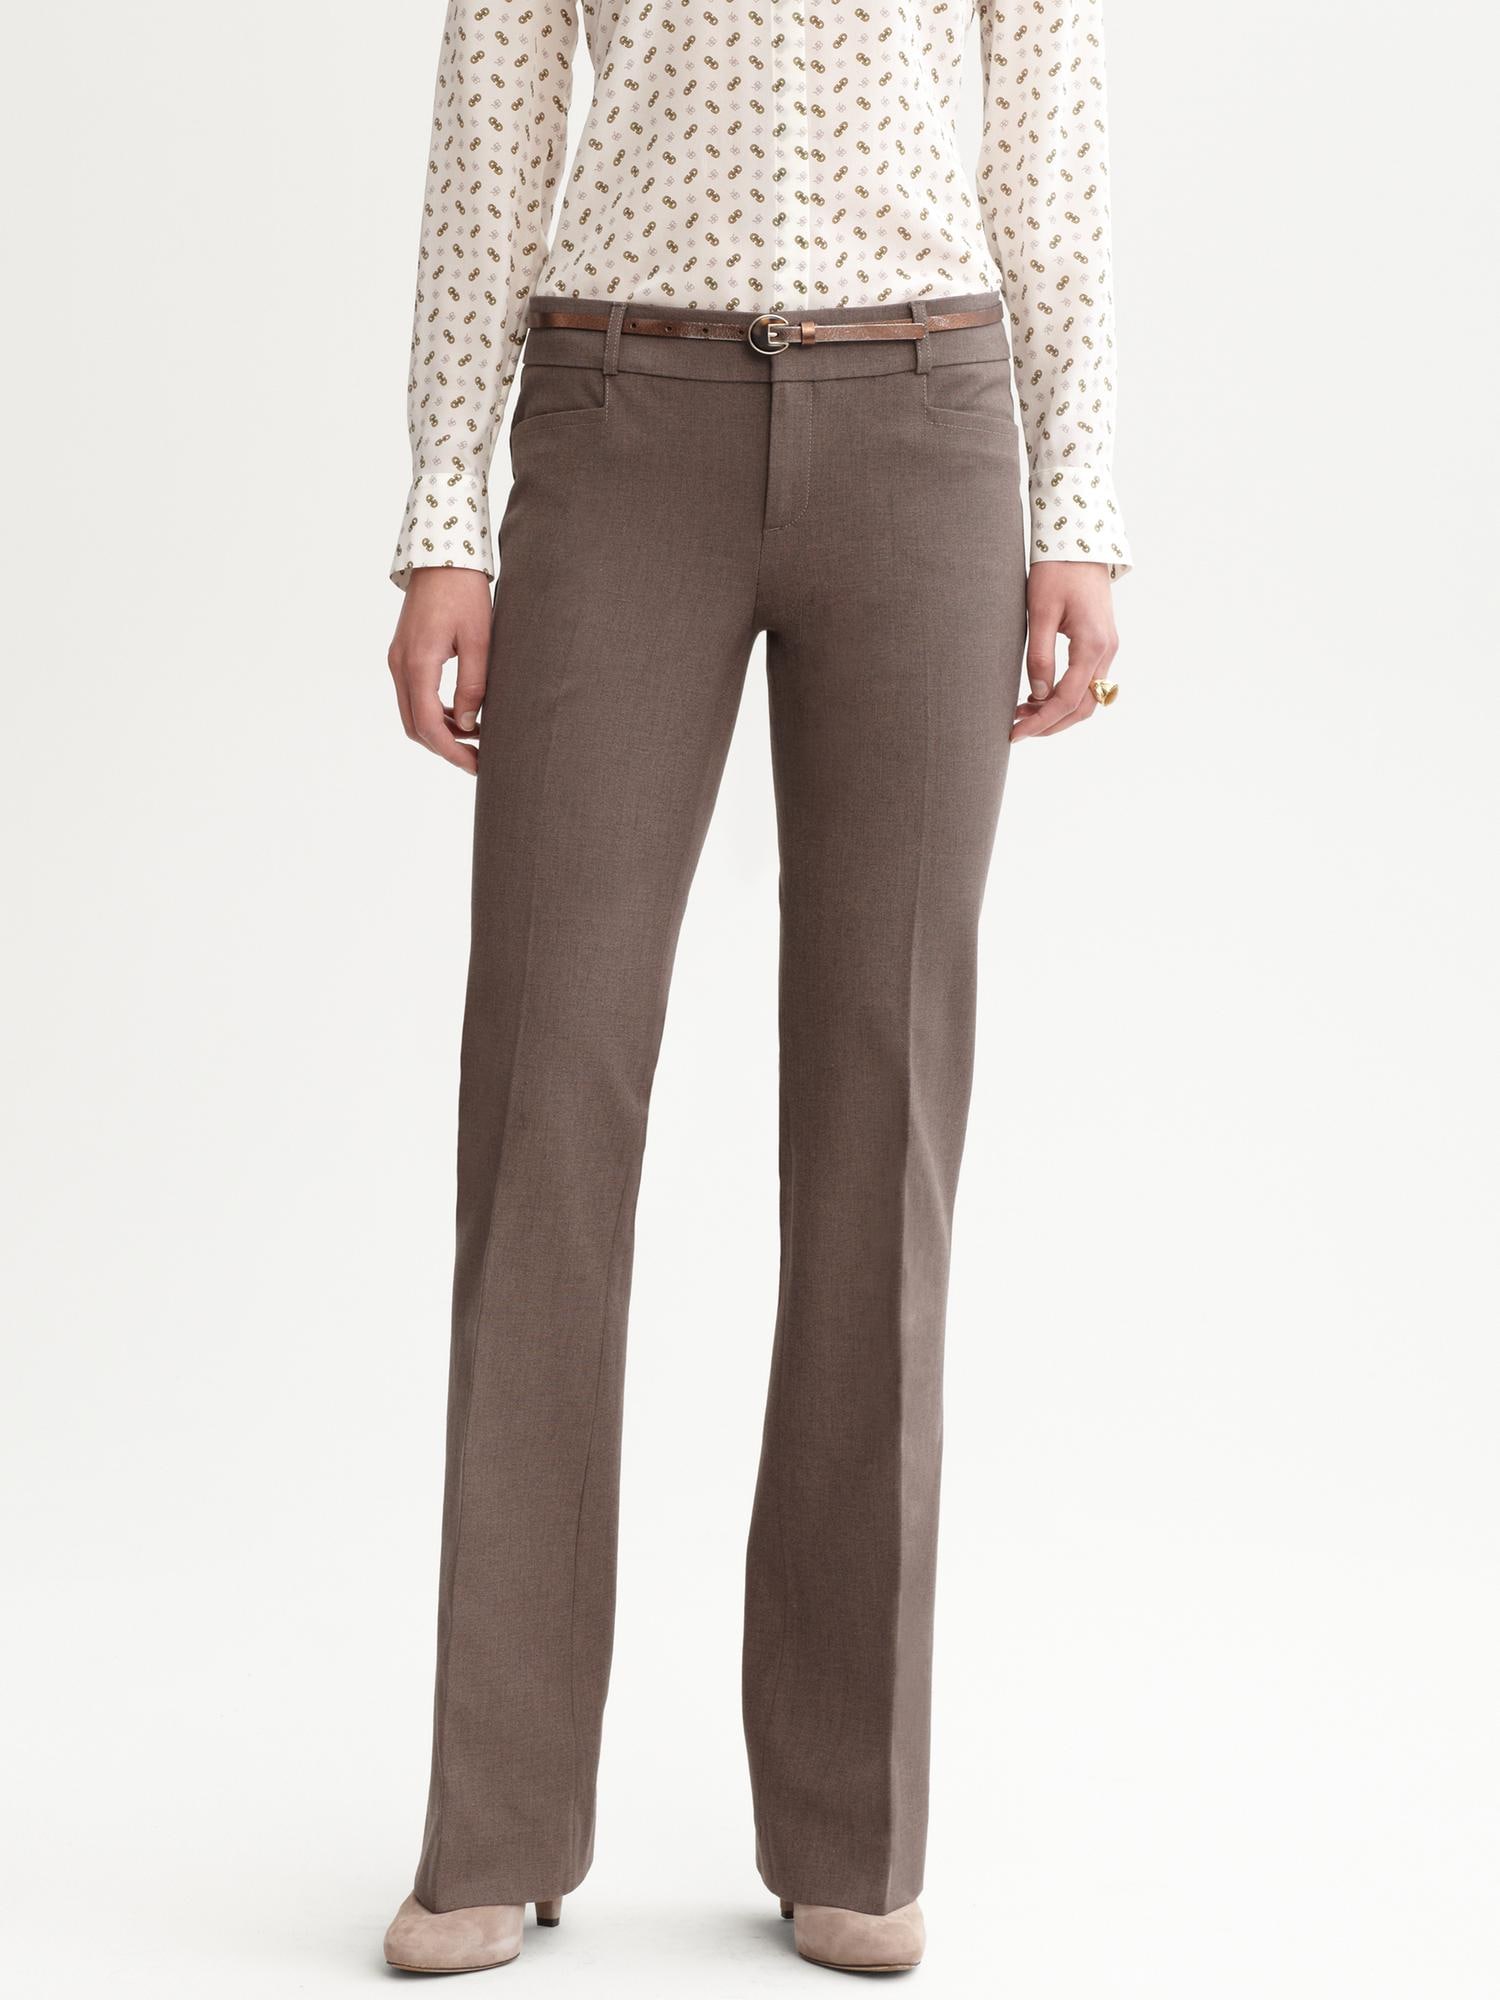 Sloan fit textured brown flare